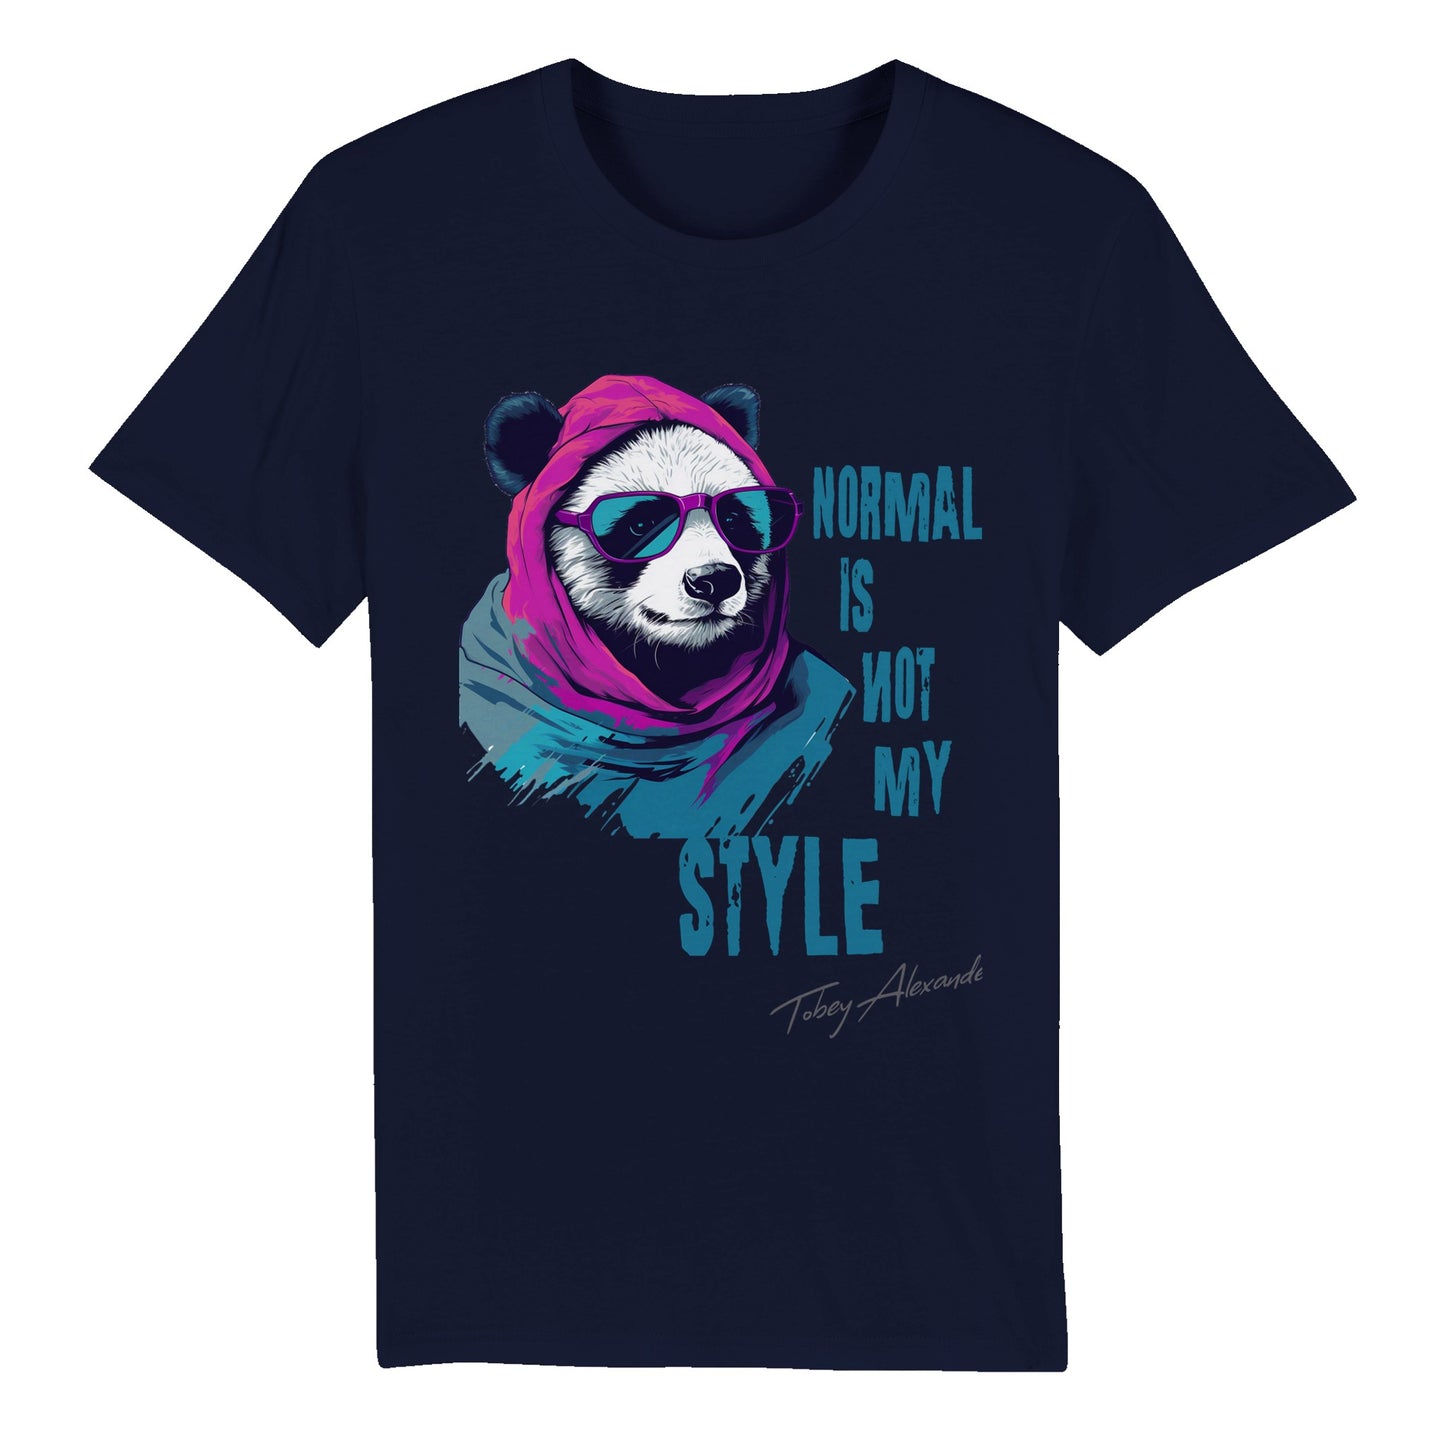 Defy Normalcy: 'Normal Is Not My Style' Organic Unisex Crewneck Tee